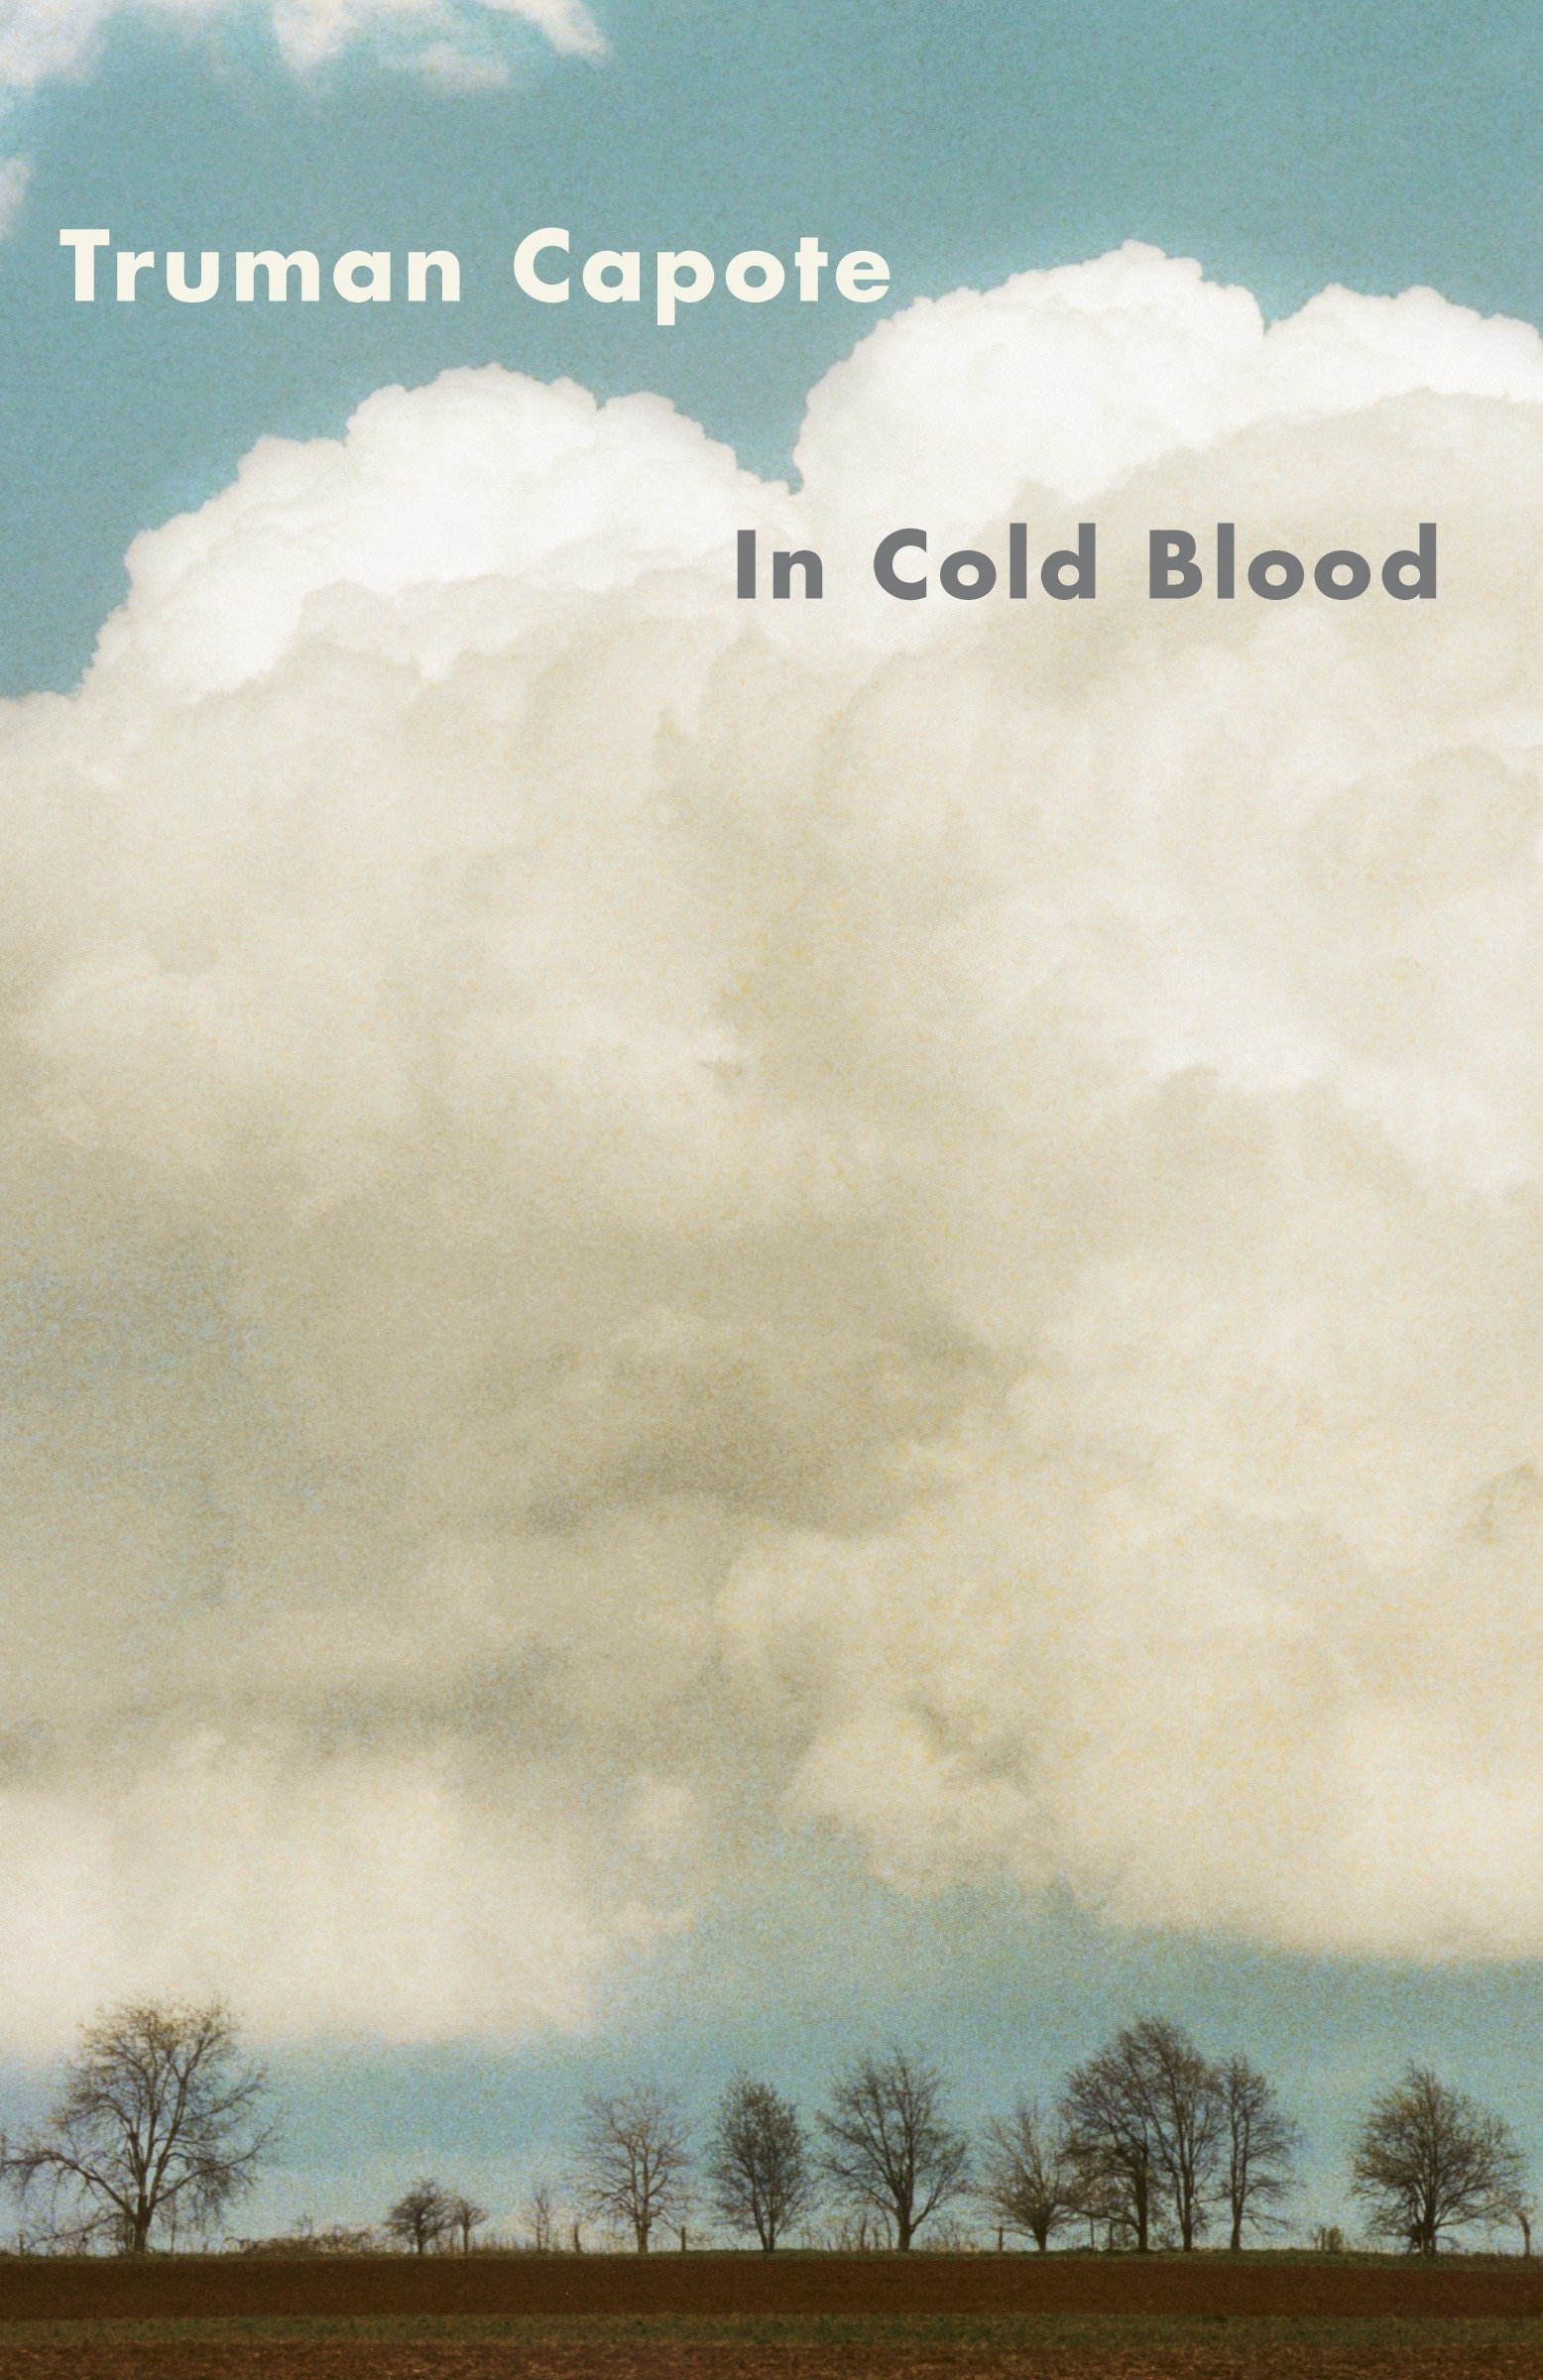 In Cold Blood by Truman Capote book cover